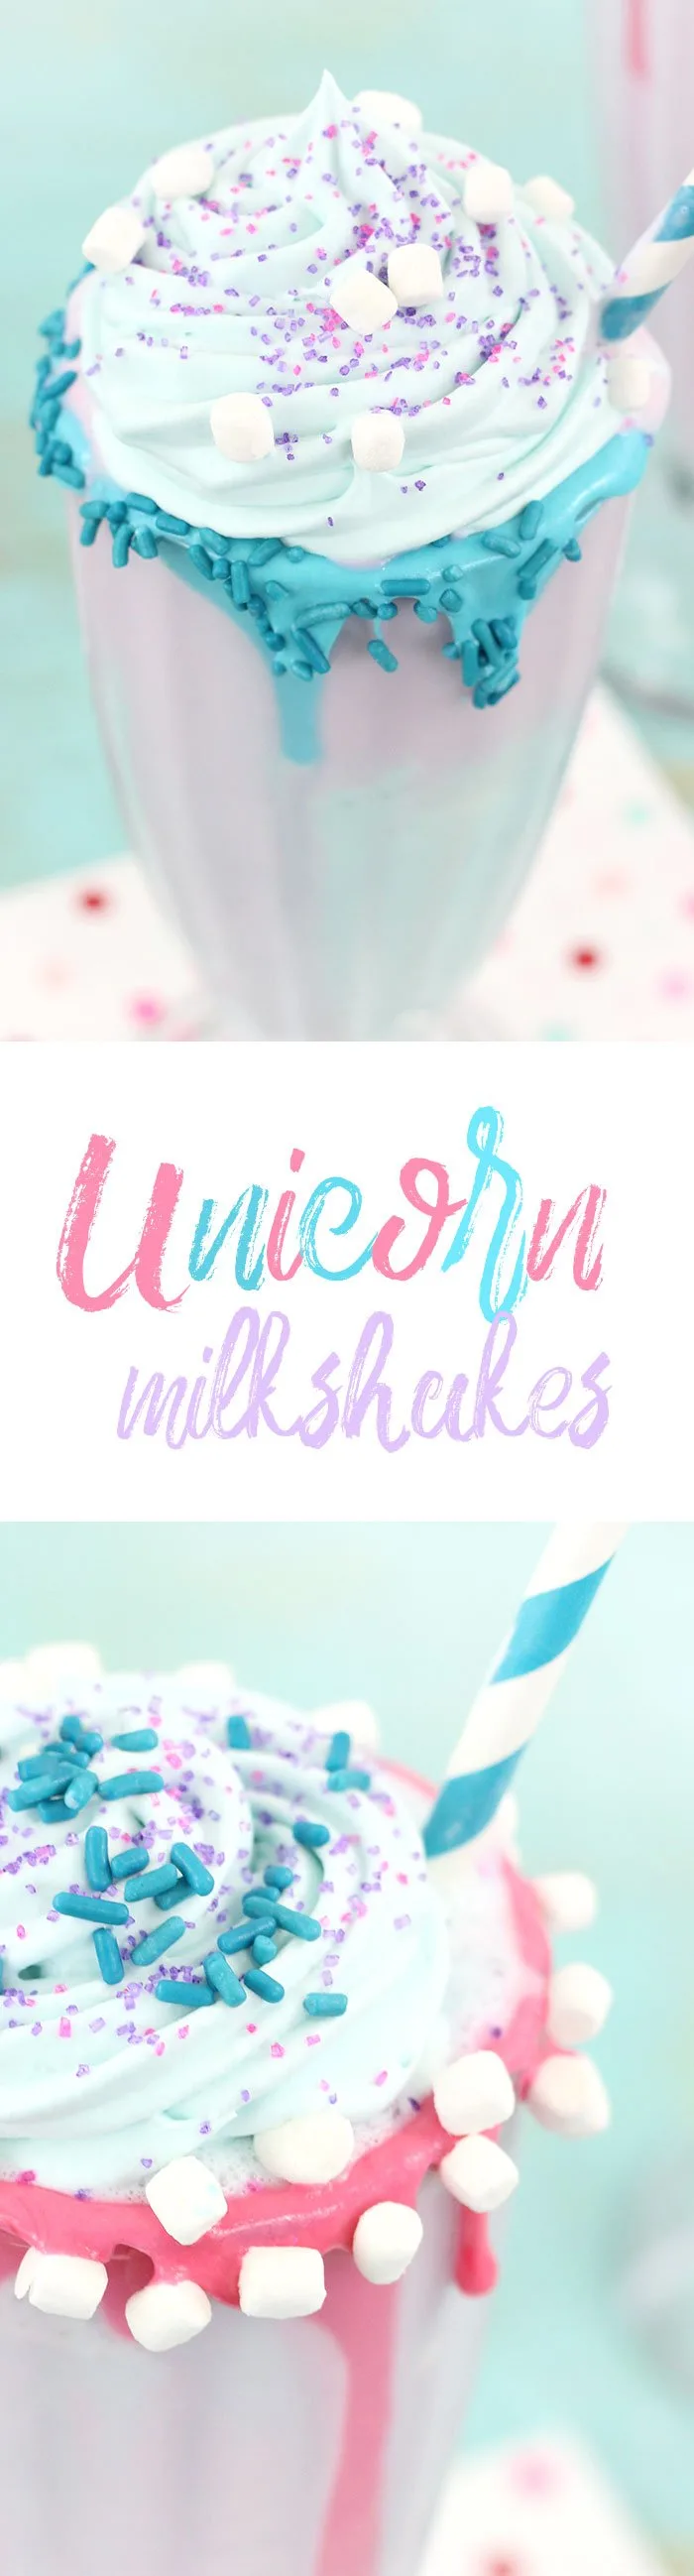 Unicorn Milkshakes are magical and oh so easy to whip up. Perfect for Unicorn themed parties and girl's night in. Unicorn ice cream is all the rage.